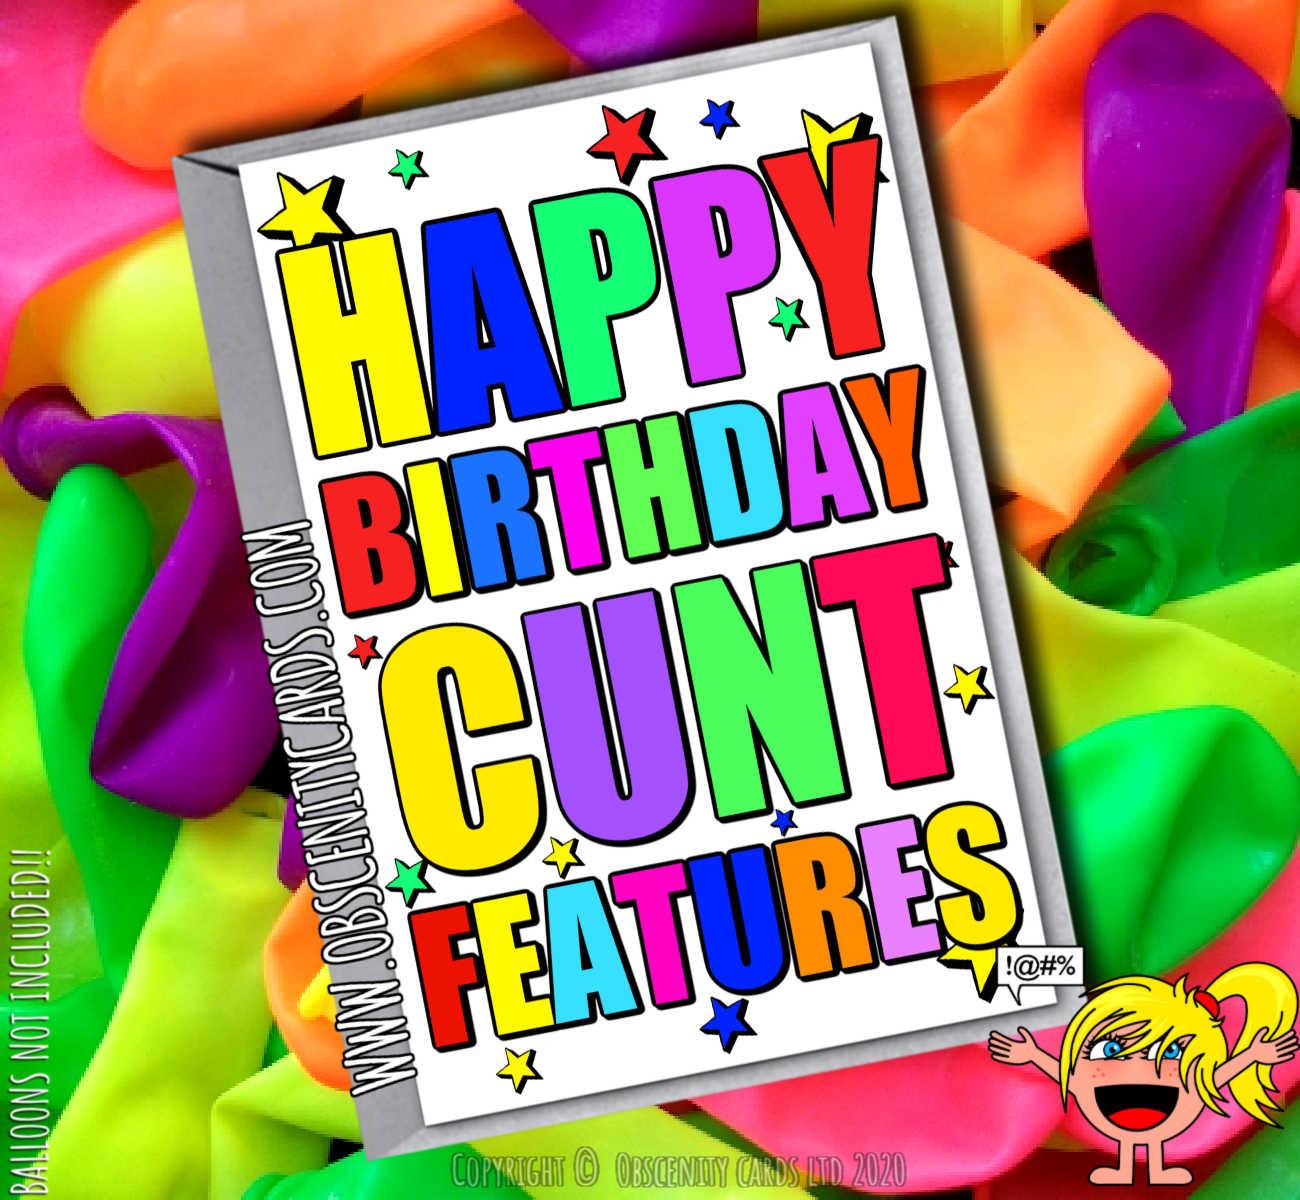 HAPPY BIRTHDAY CUNT FEATURES FUNNY CARD